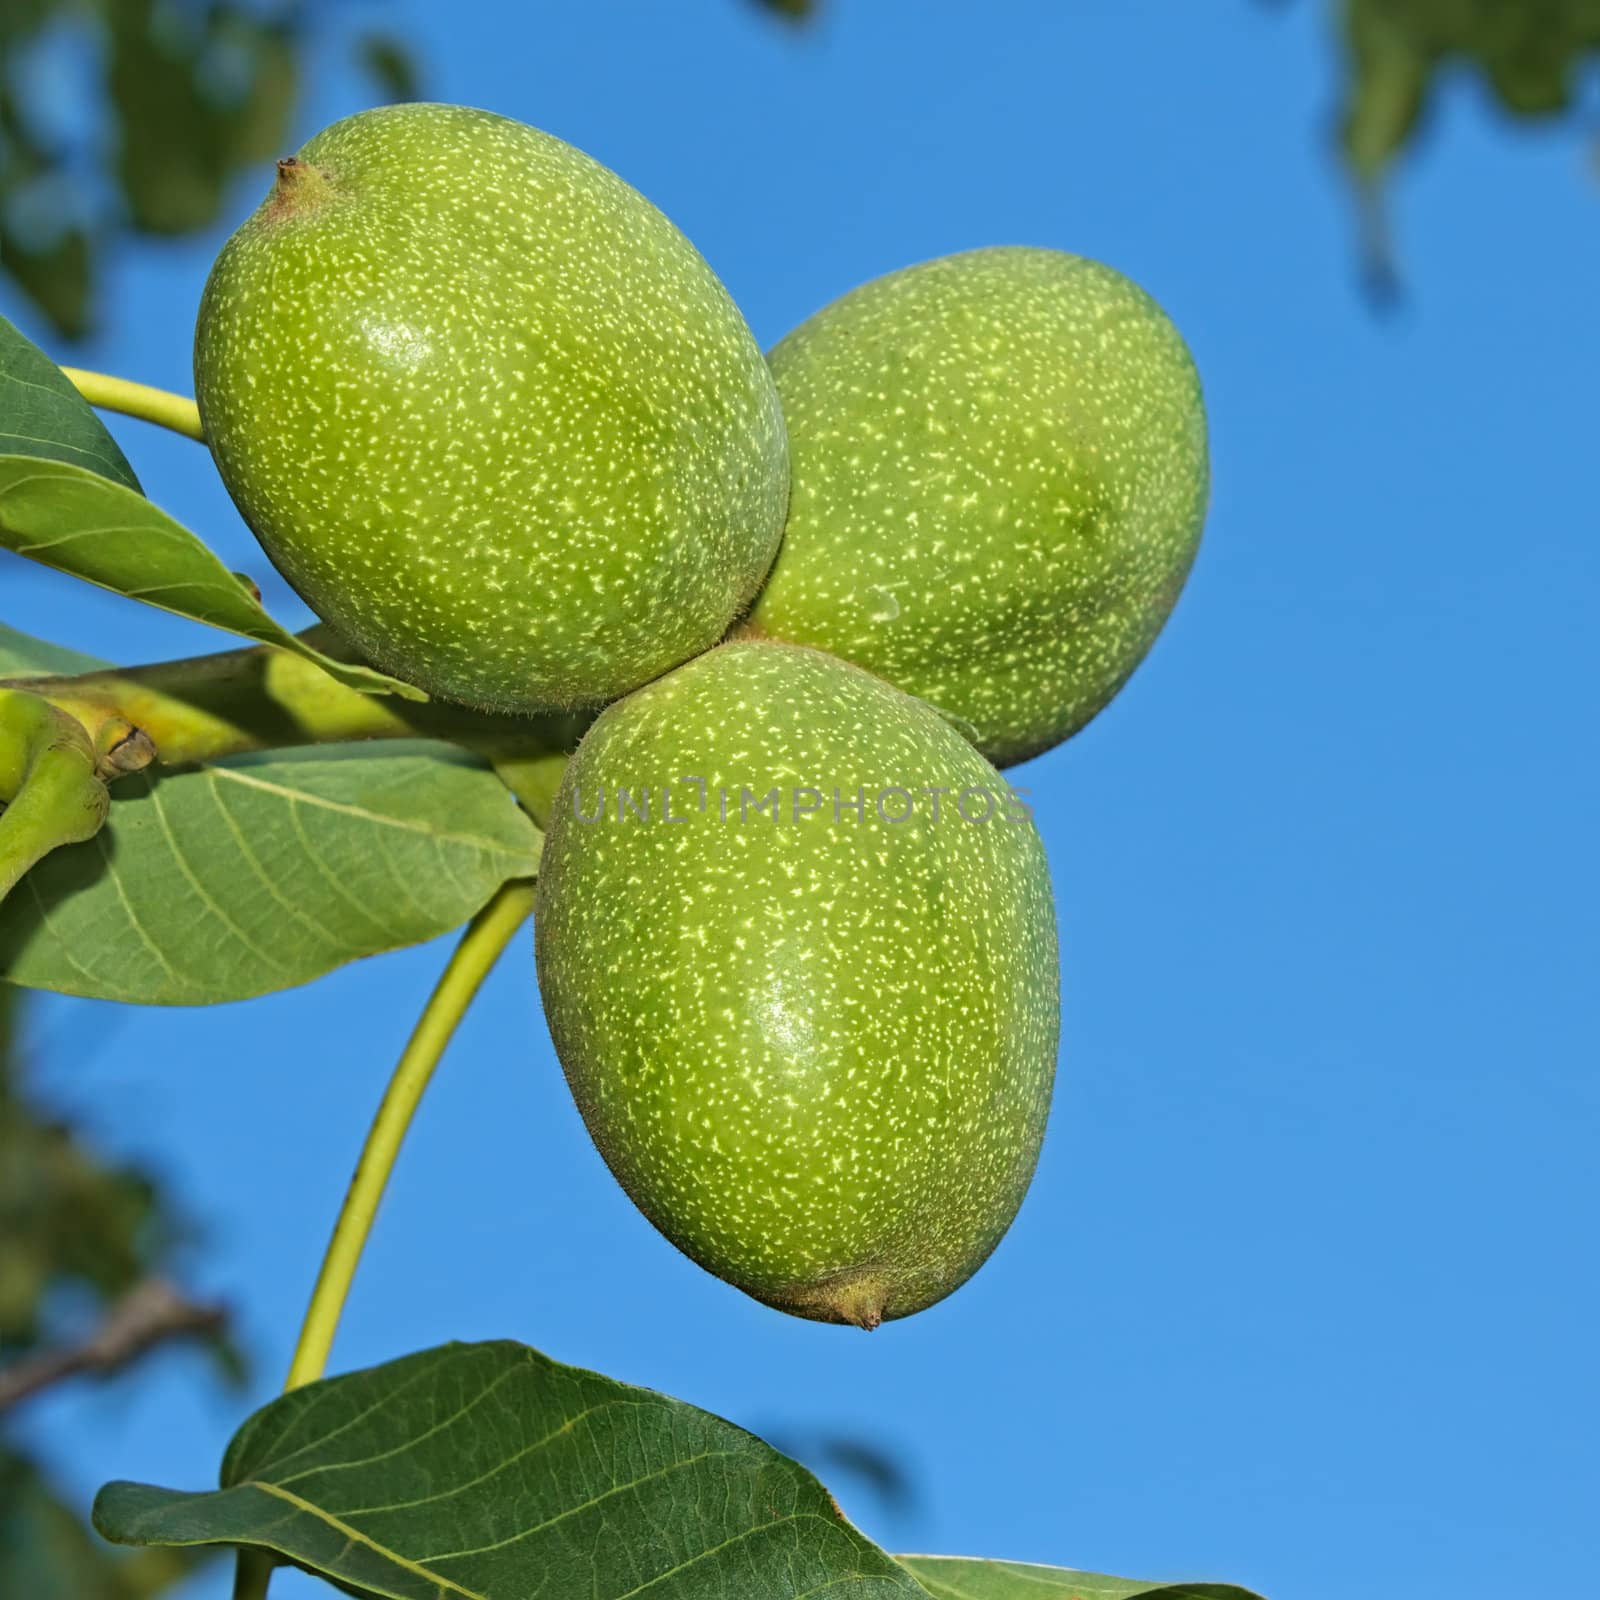 Green young fruits of  Walnut hanging on the branch against blue sky